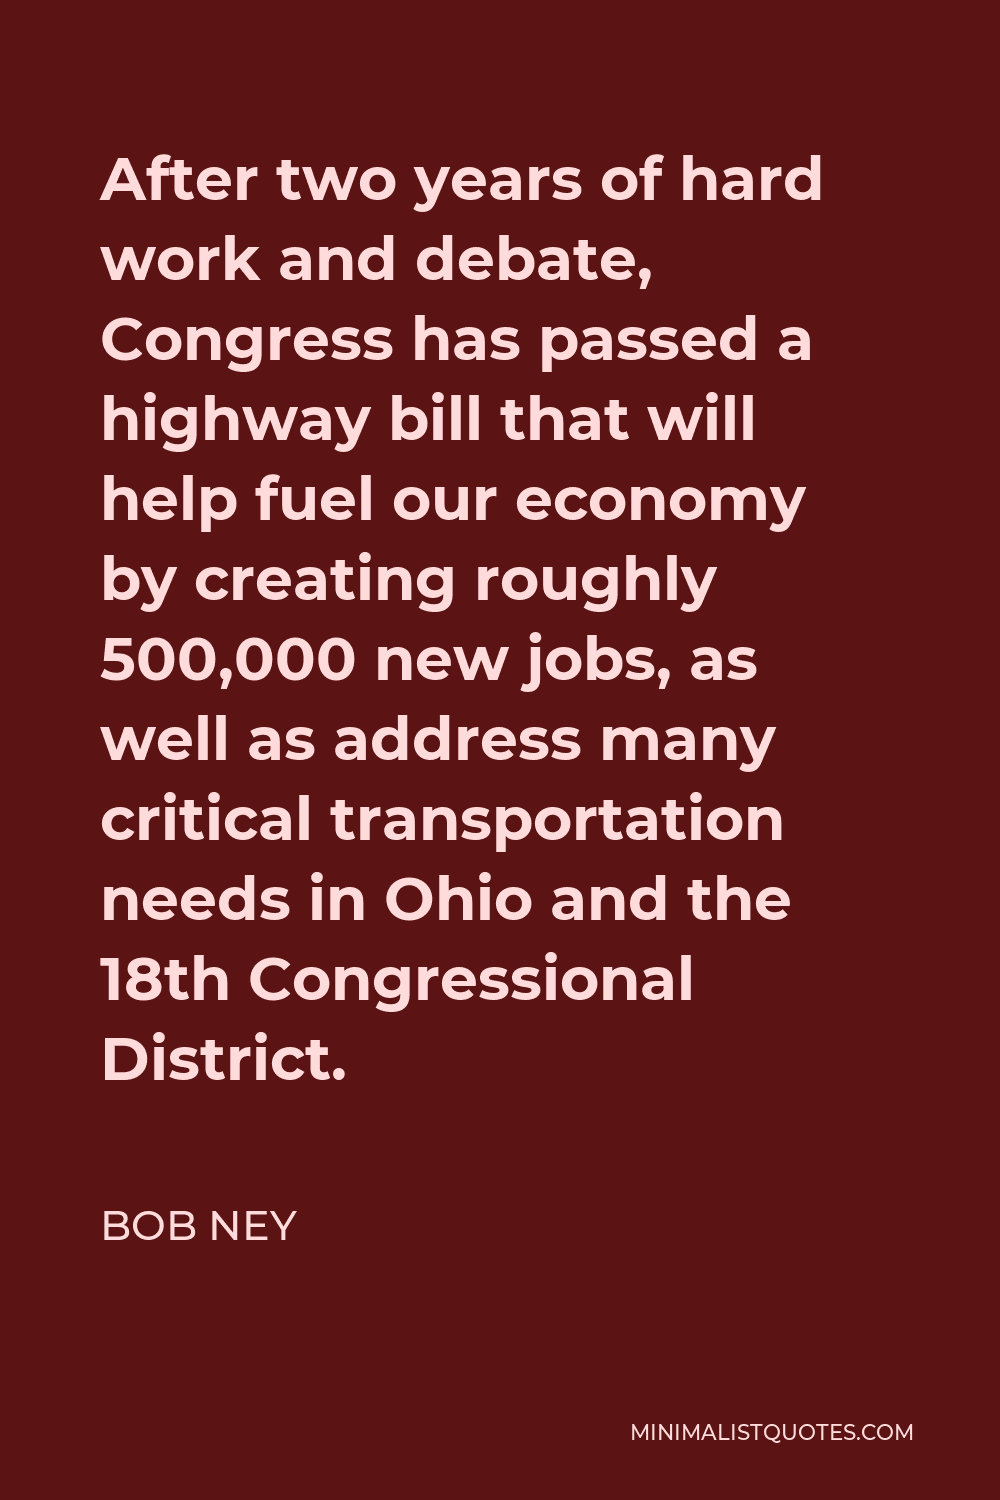 Bob Ney Quote - After two years of hard work and debate, Congress has passed a highway bill that will help fuel our economy by creating roughly 500,000 new jobs, as well as address many critical transportation needs in Ohio and the 18th Congressional District.